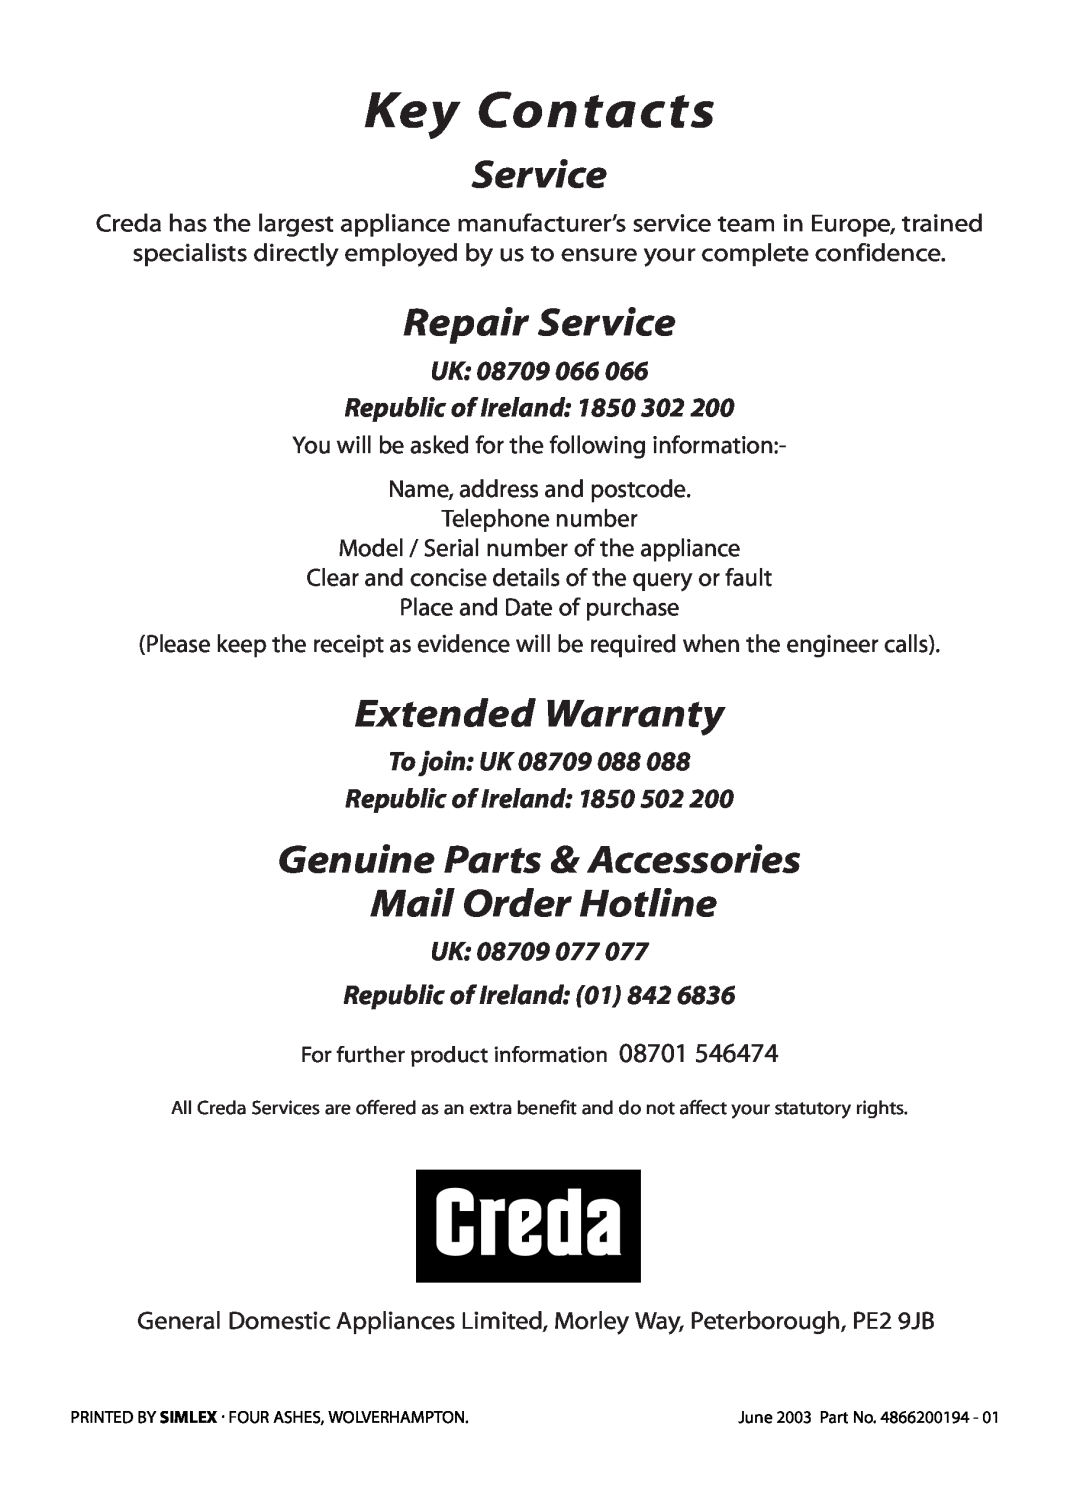 Creda S420E manual Key Contacts, Repair Service, Extended Warranty, Genuine Parts & Accessories Mail Order Hotline 